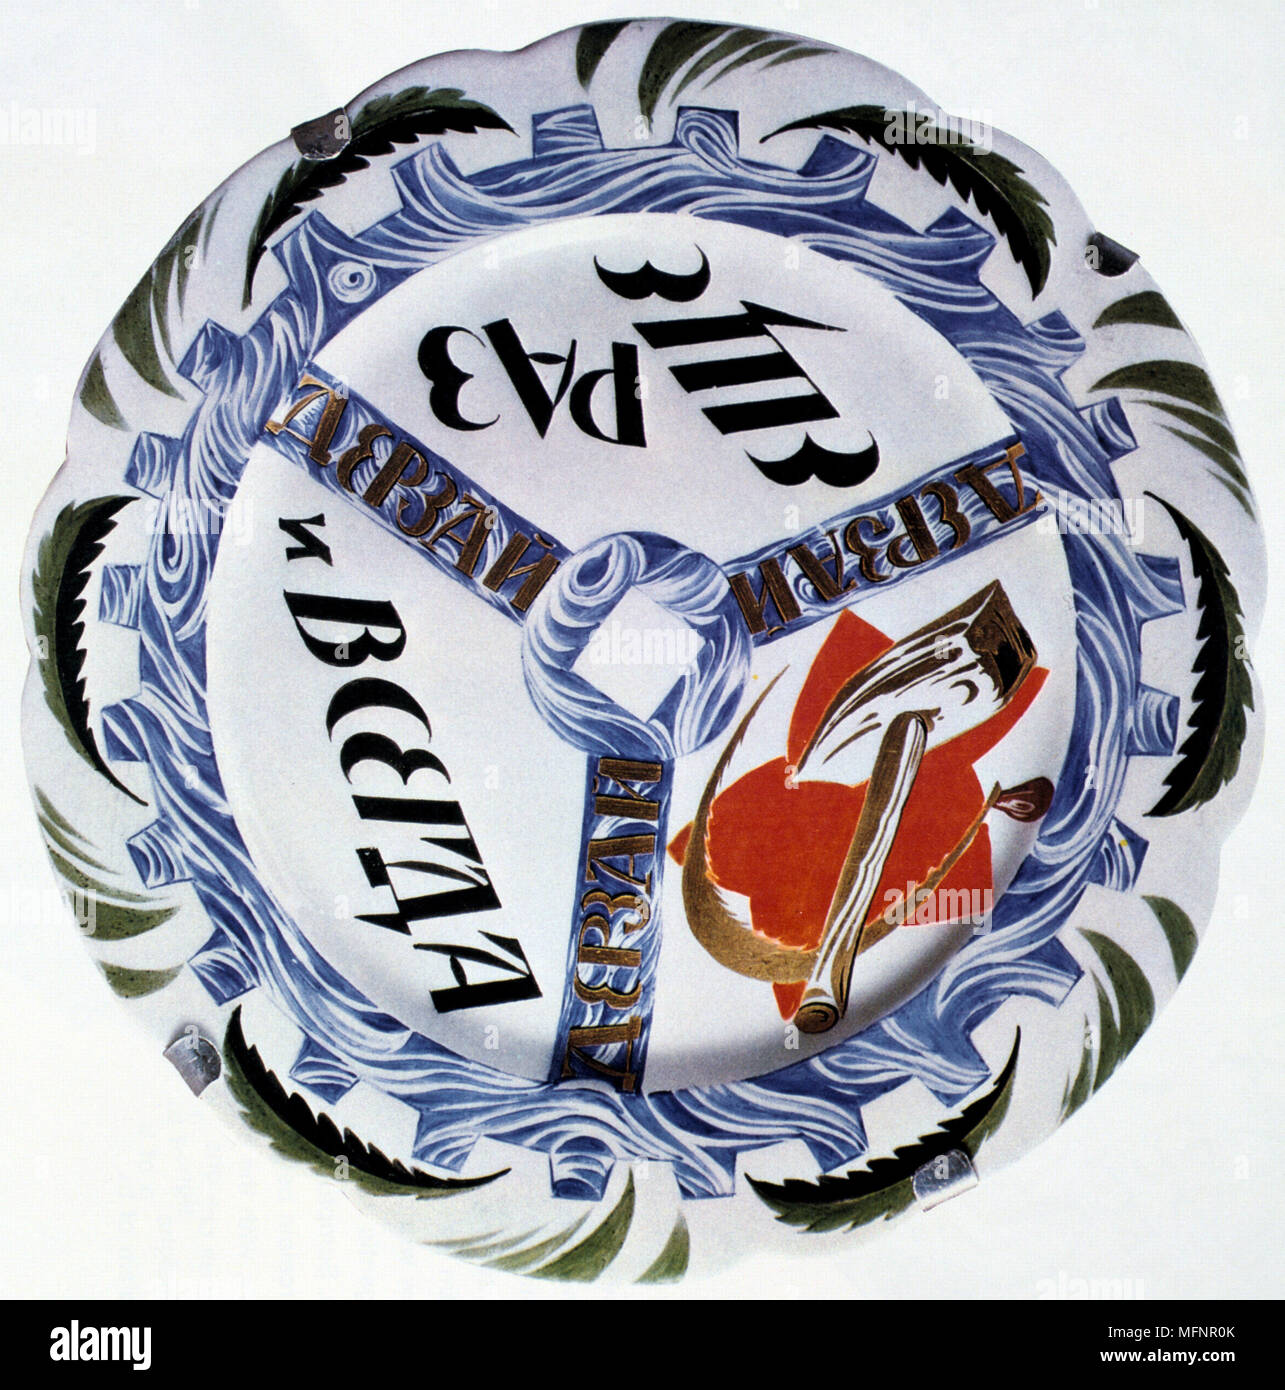 Plate produced by the Russian State Porcelain Factory, 1921.  Design by Rudlodph Vilde (1868-1942).  Russia USSR Communism Communist Stock Photo